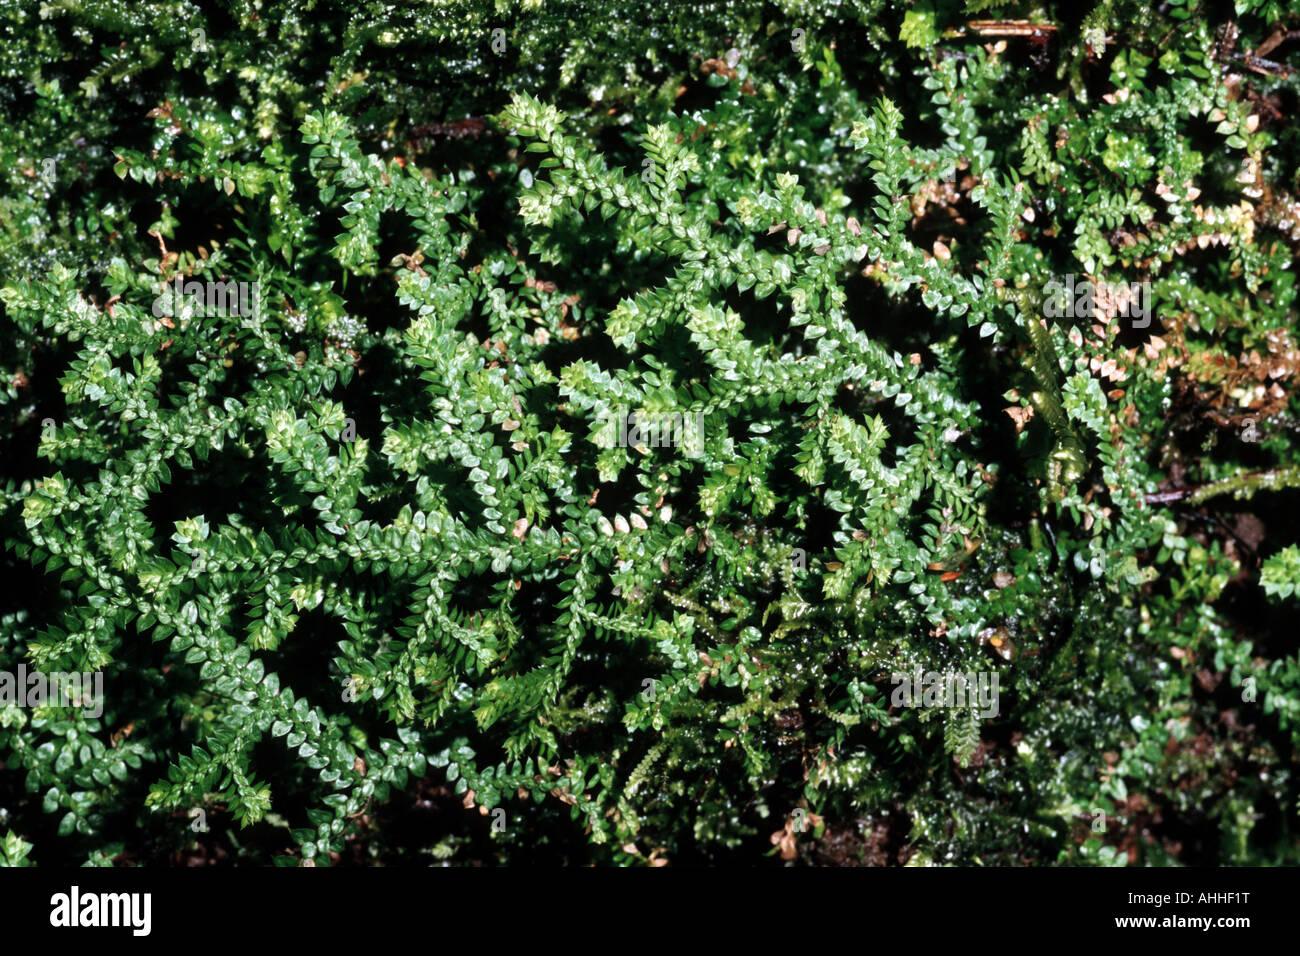 Toothed Clubmoss, Clubmoss, Denticulate selaginella, Denticulate spikemoss (Selaginella denticulata), creeping plants on the fo Stock Photo